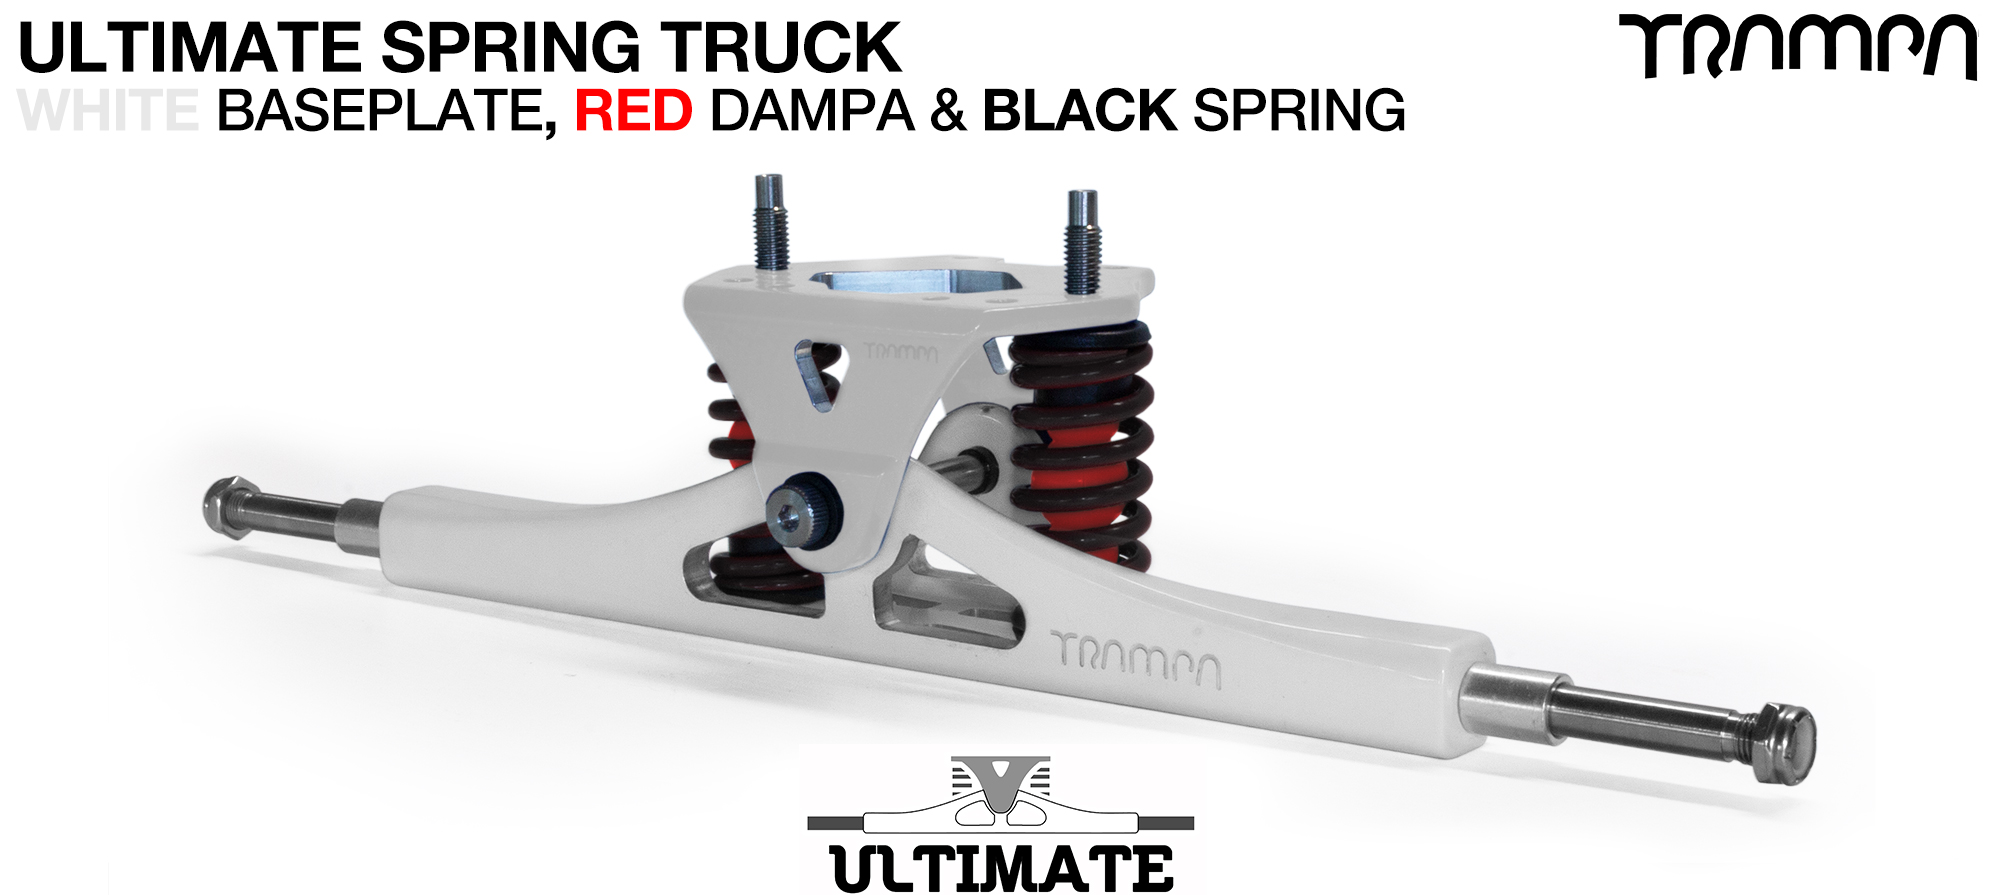 ULTIMATE ATB TRUCK - WHITE ATB Hanger with TITANIUM Axles & Kingpin & WHITE with BLACK logo Baseplate  